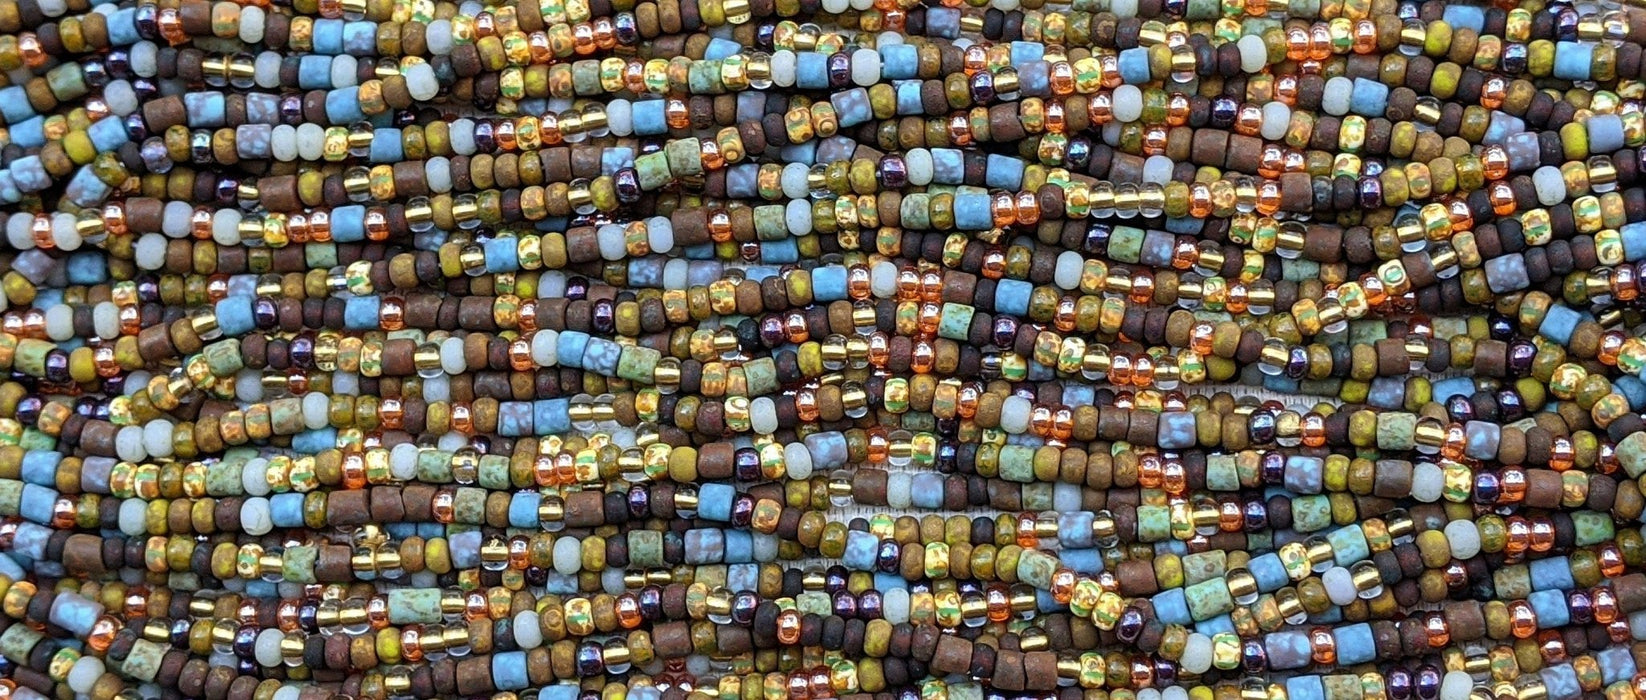 Aged Gypsy Peddler Picasso Stripe Mix Czech Glass 5mm Tile Beads and 6/0 Czech Glass Seed Beads - 20 Inch Strand (BW82) - Beads and Babble